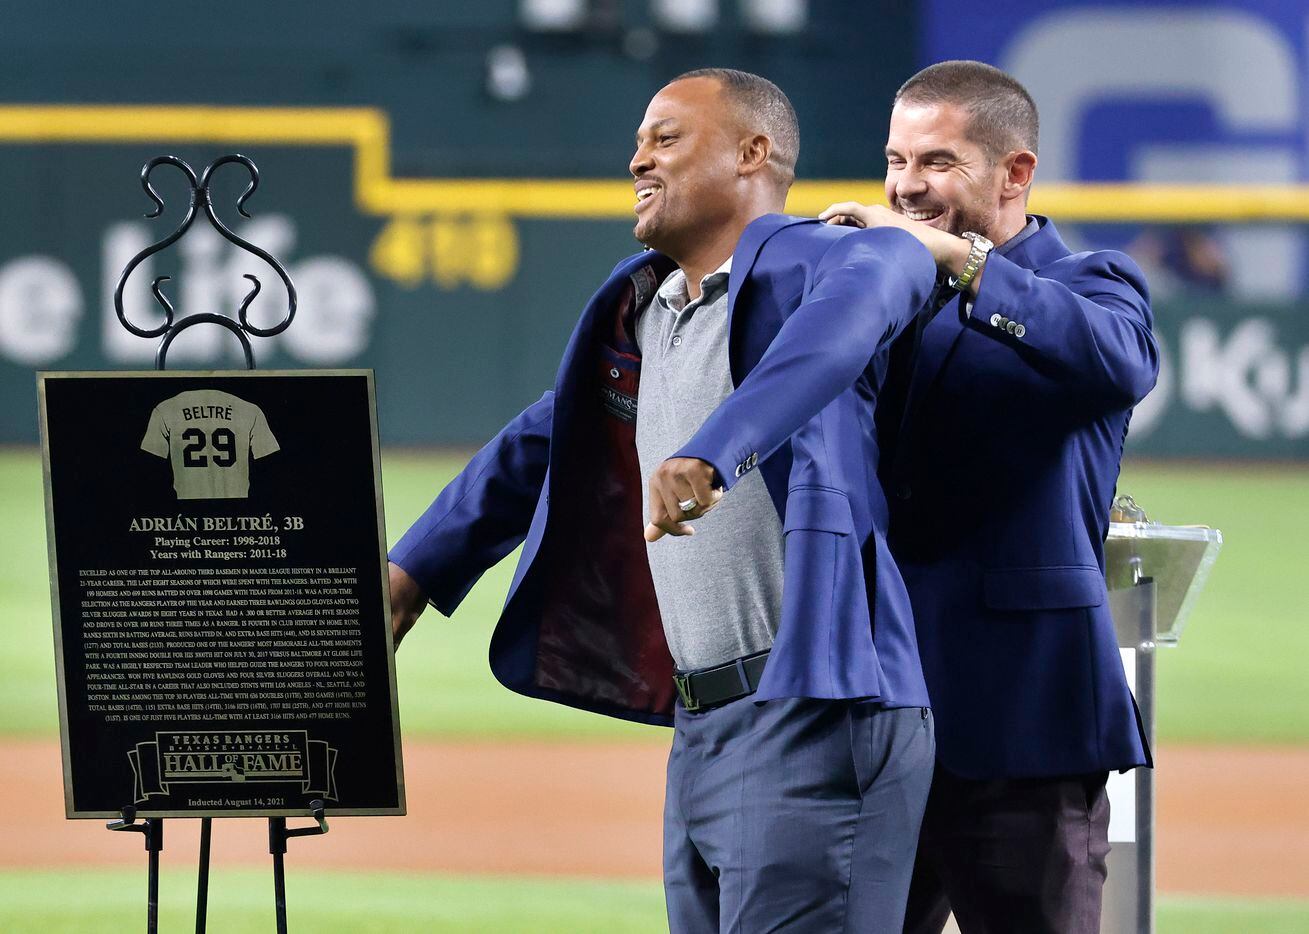 Former Texas Rangers infielders Adrian Beltre slides into the blue jacket with an assist from his presenter Michael Young during the Texas Rangers Baseball Hall of Fame induction ceremony at Globe Life Field in Arlington, Saturday, August 14, 2021. Public address announcer Chuck Morgan was also inducted. (Tom Fox/The Dallas Morning News)